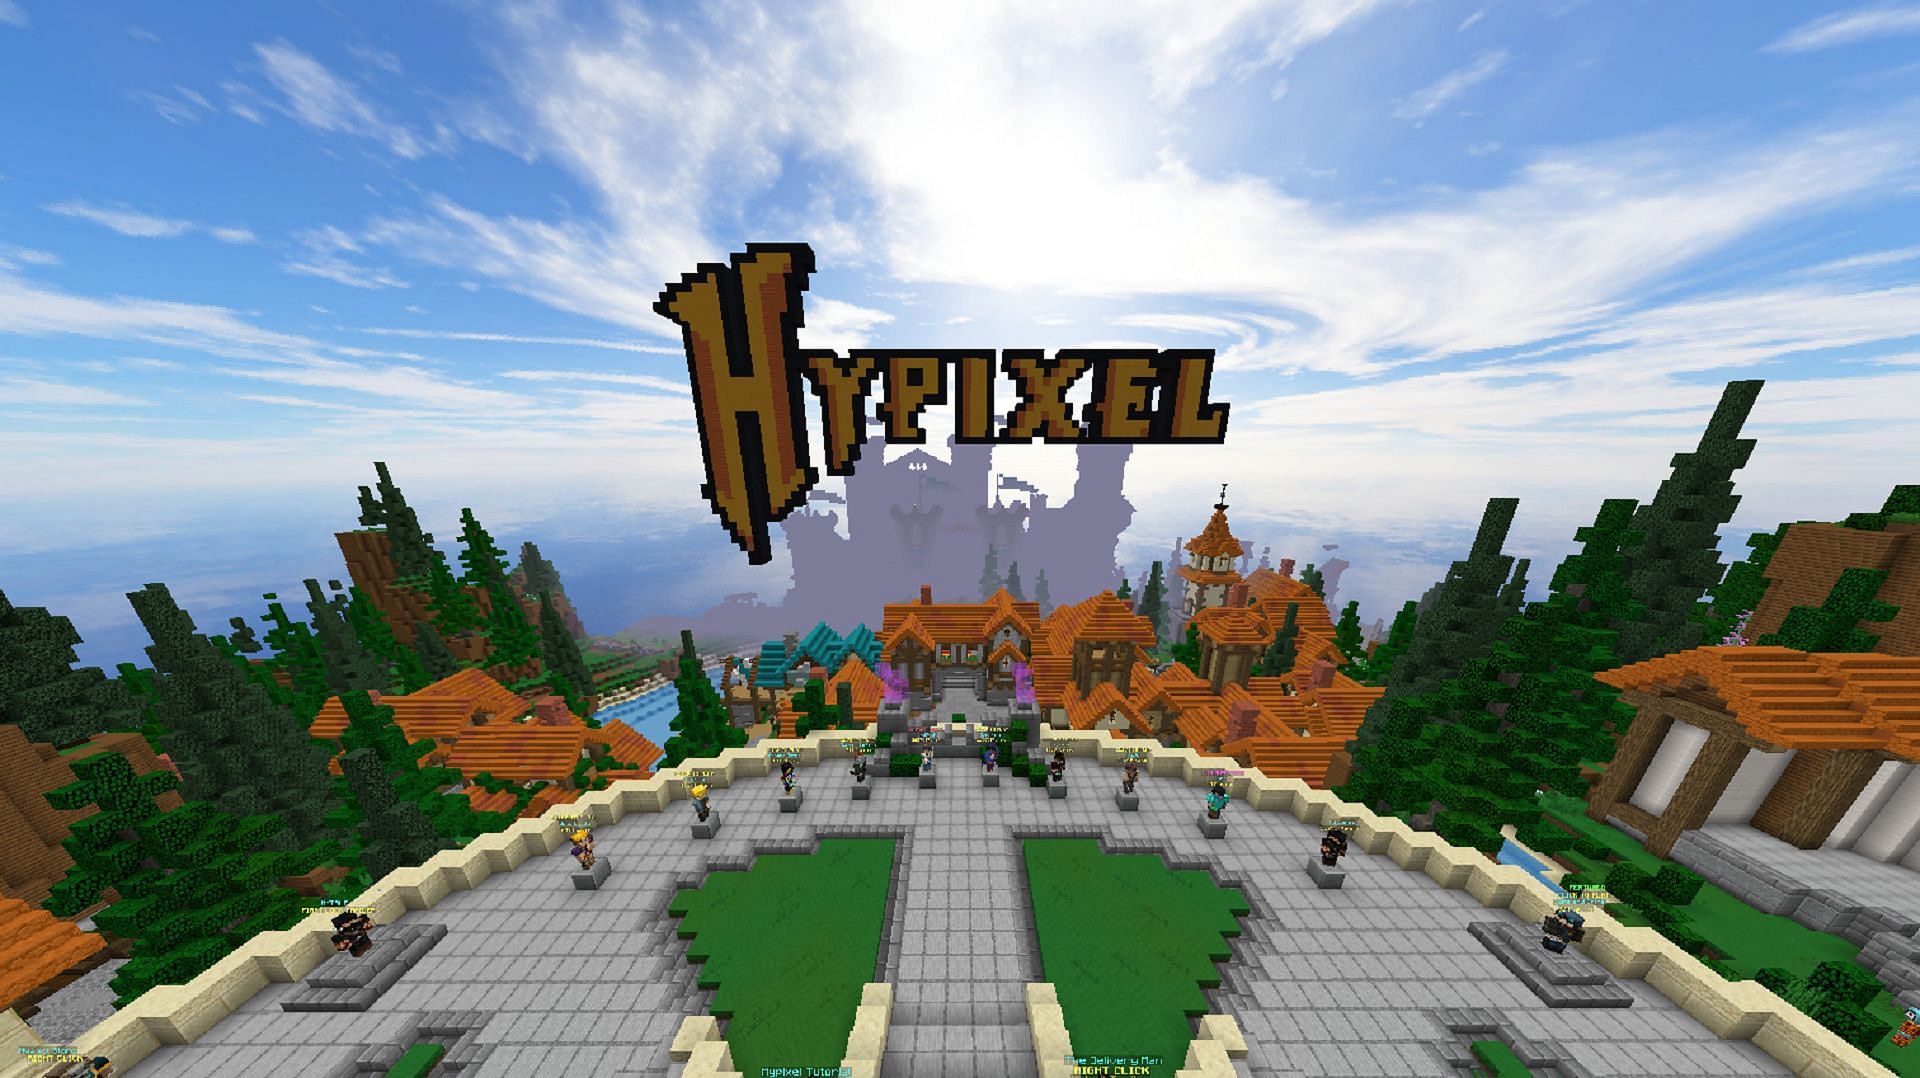 There is certainly no shortage of Minecraft servers to enjoy in 2023 (Image via Hypixel.net)